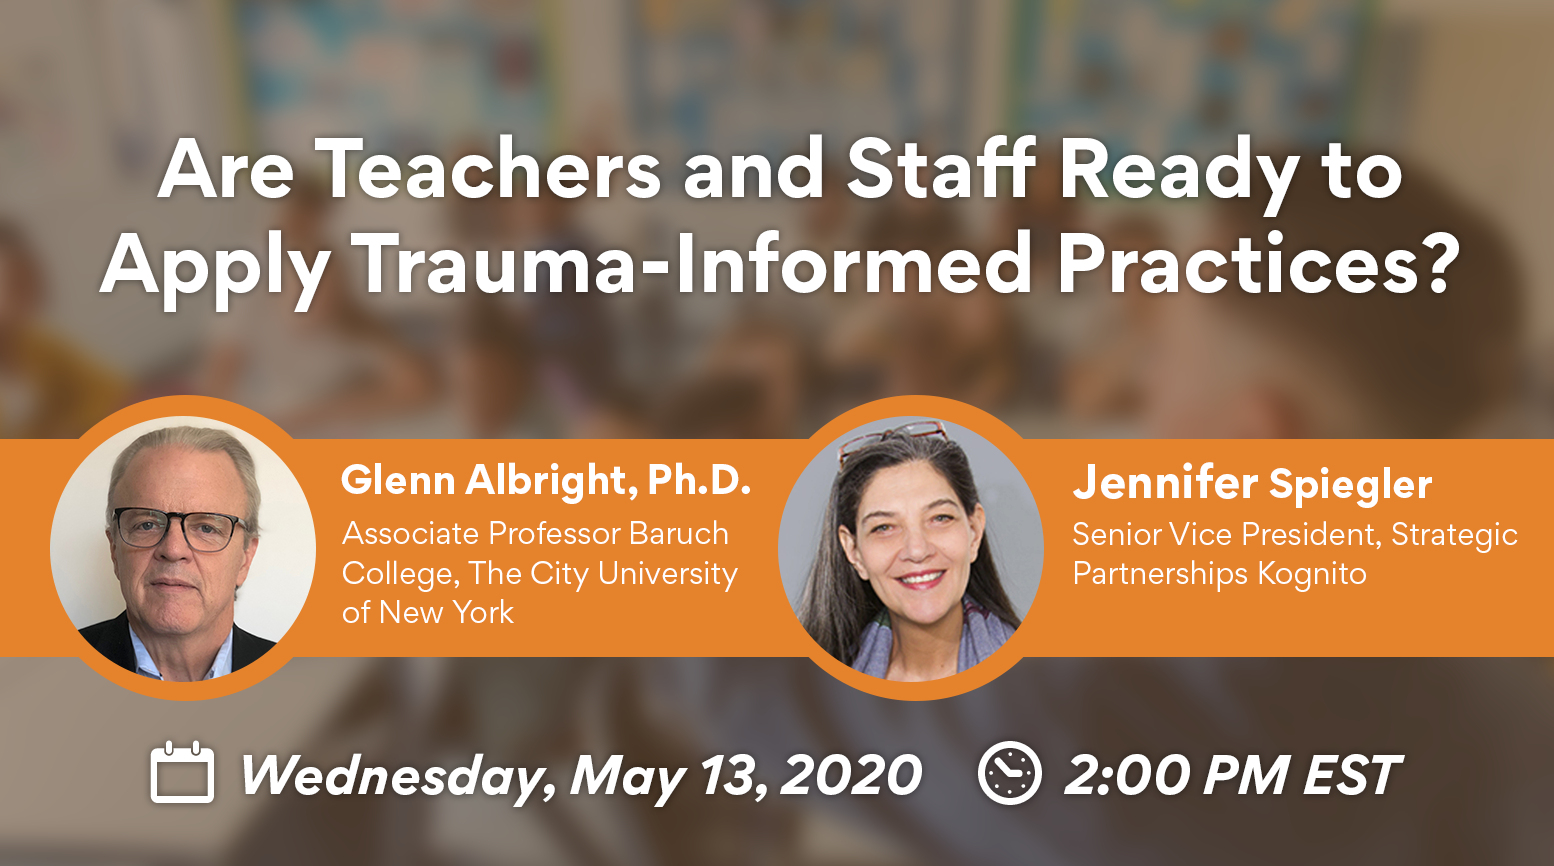 Are Teachers and Staff Ready to Apply Trauma-Informed Practices?